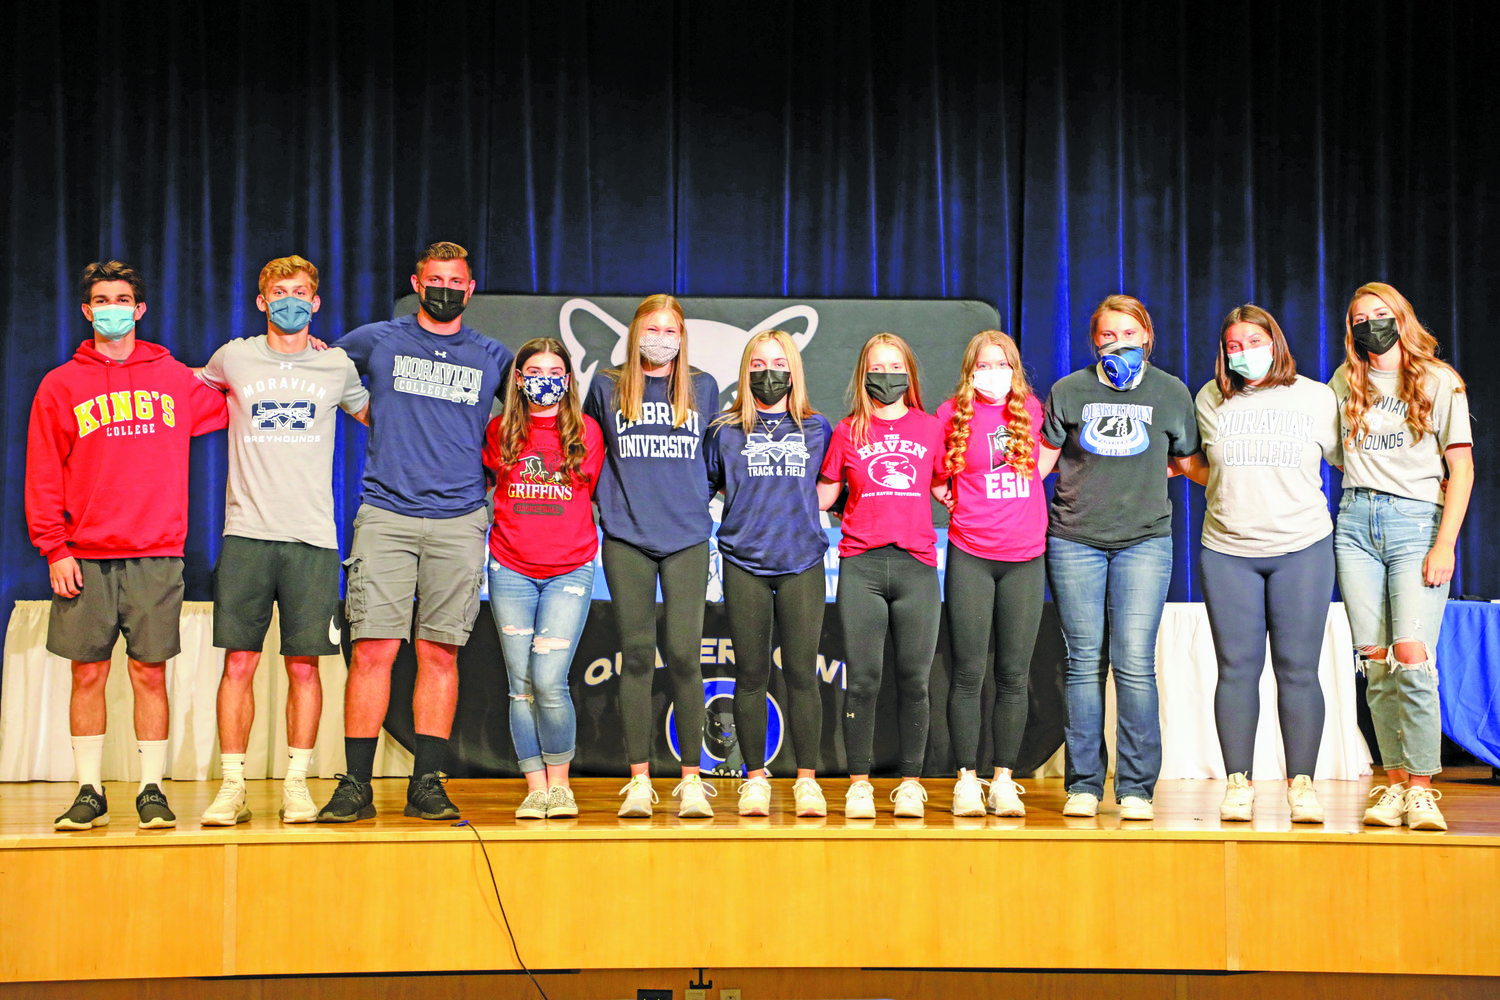 Members of Quakertown’s Class of 2021 were recognized earlier this year for their commitment to play collegiate sports. From left are: Zach Webb, Trevor Gray, Matt Pavone, Fallon Grandinetti, Holly Smith, Rylie Murphy, Paige Daugherty, Kayla Horning, Kerrin Long, Liz Miskovsky and Abigail McClaskey. Not pictured are: Glenn Moyer and Andrew Saglimbeni.